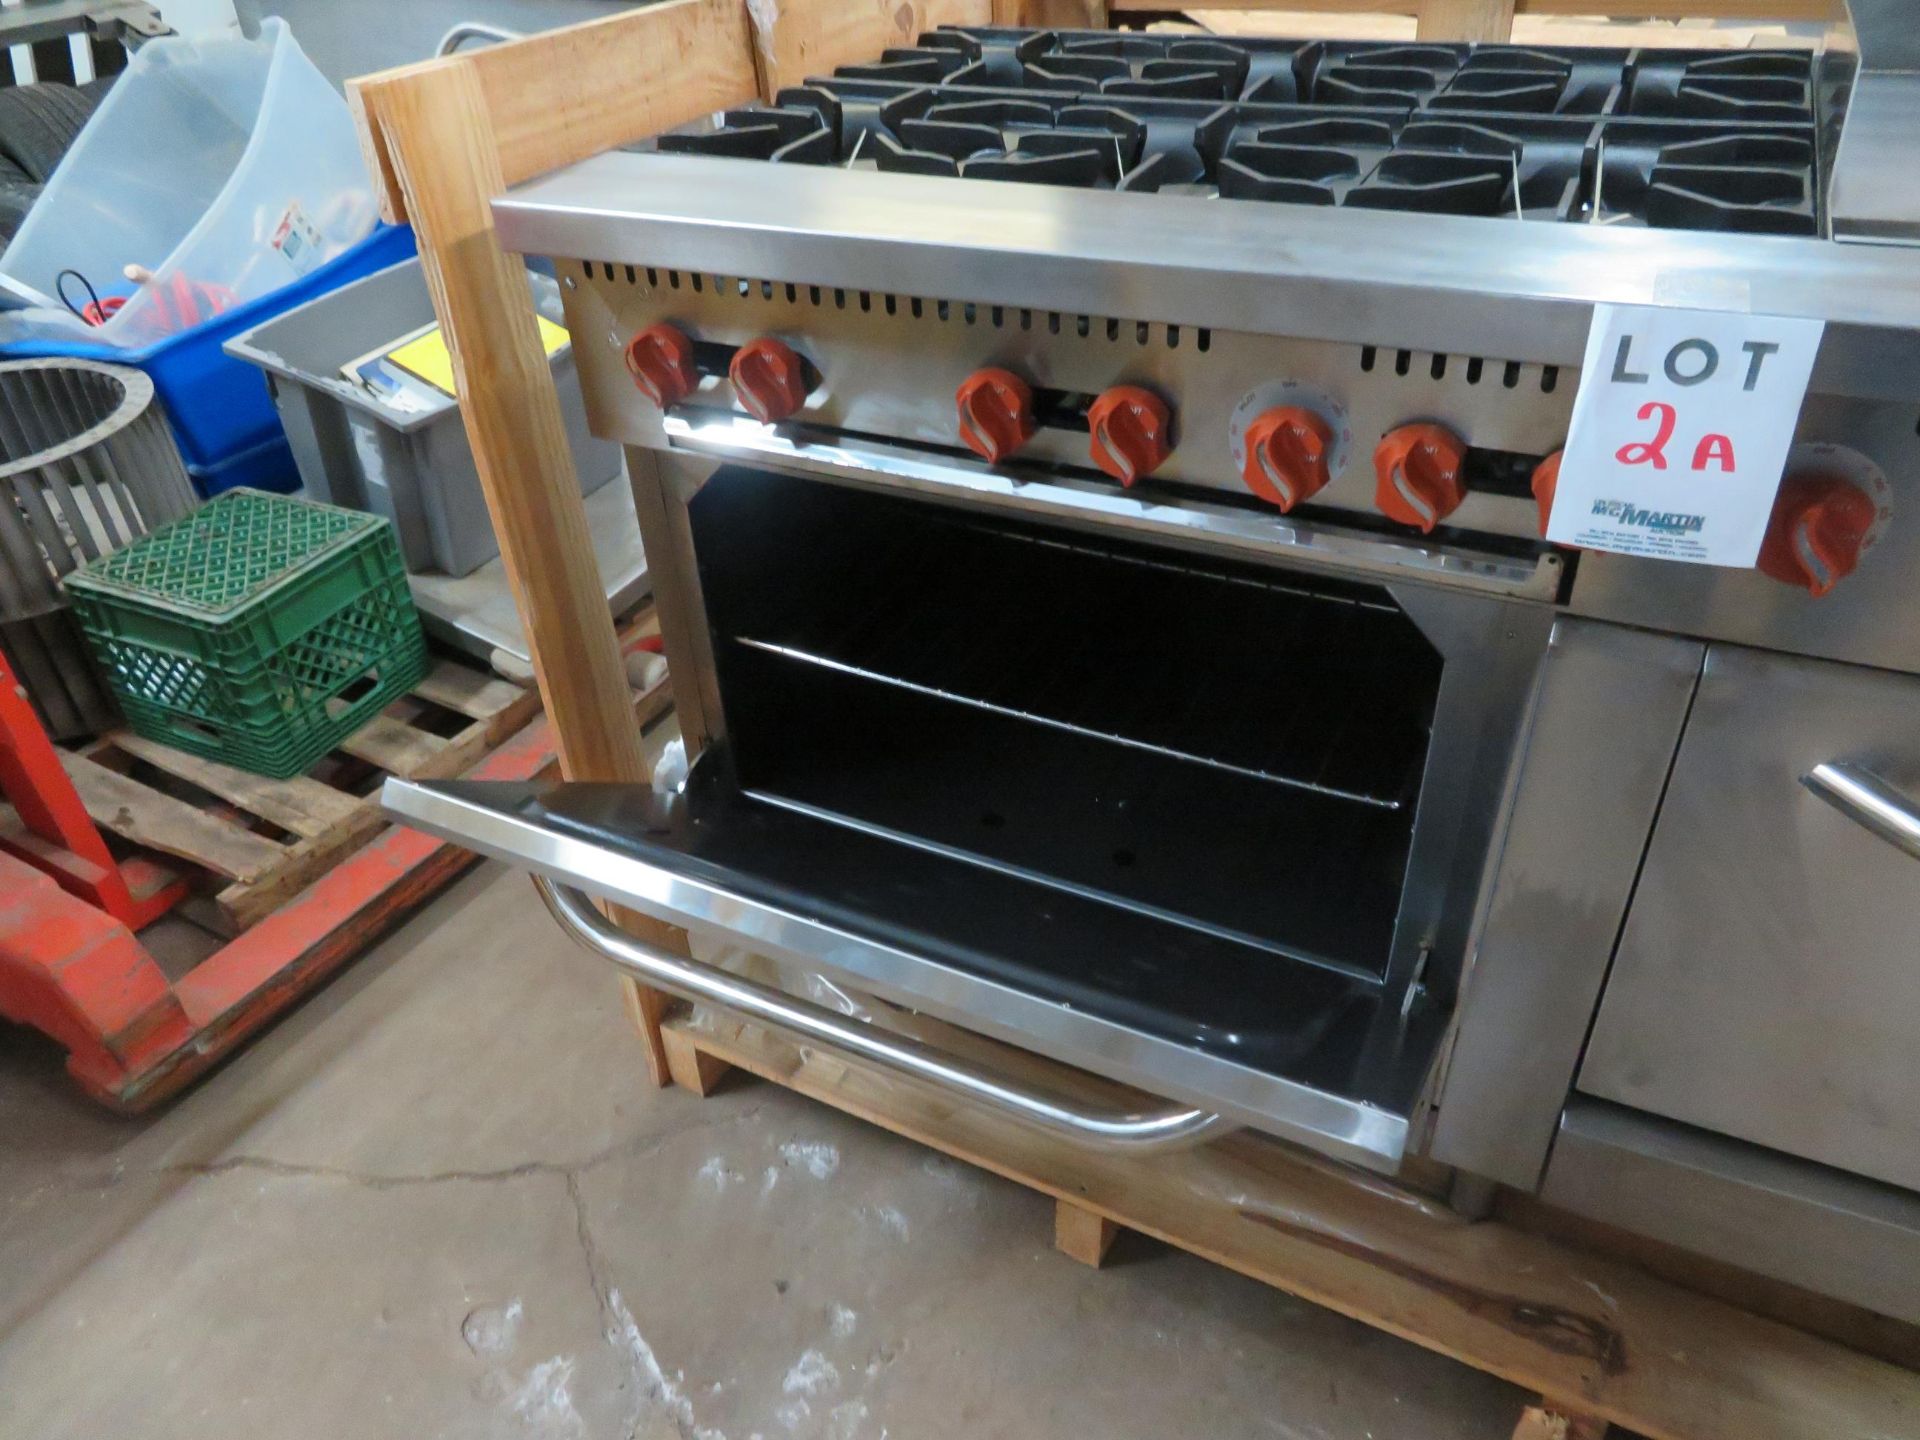 Brand New SIERRA combination gas 60"range with 6 burners and 24" hot plate/griddle, Mod #SR-6B-24G- - Image 4 of 5